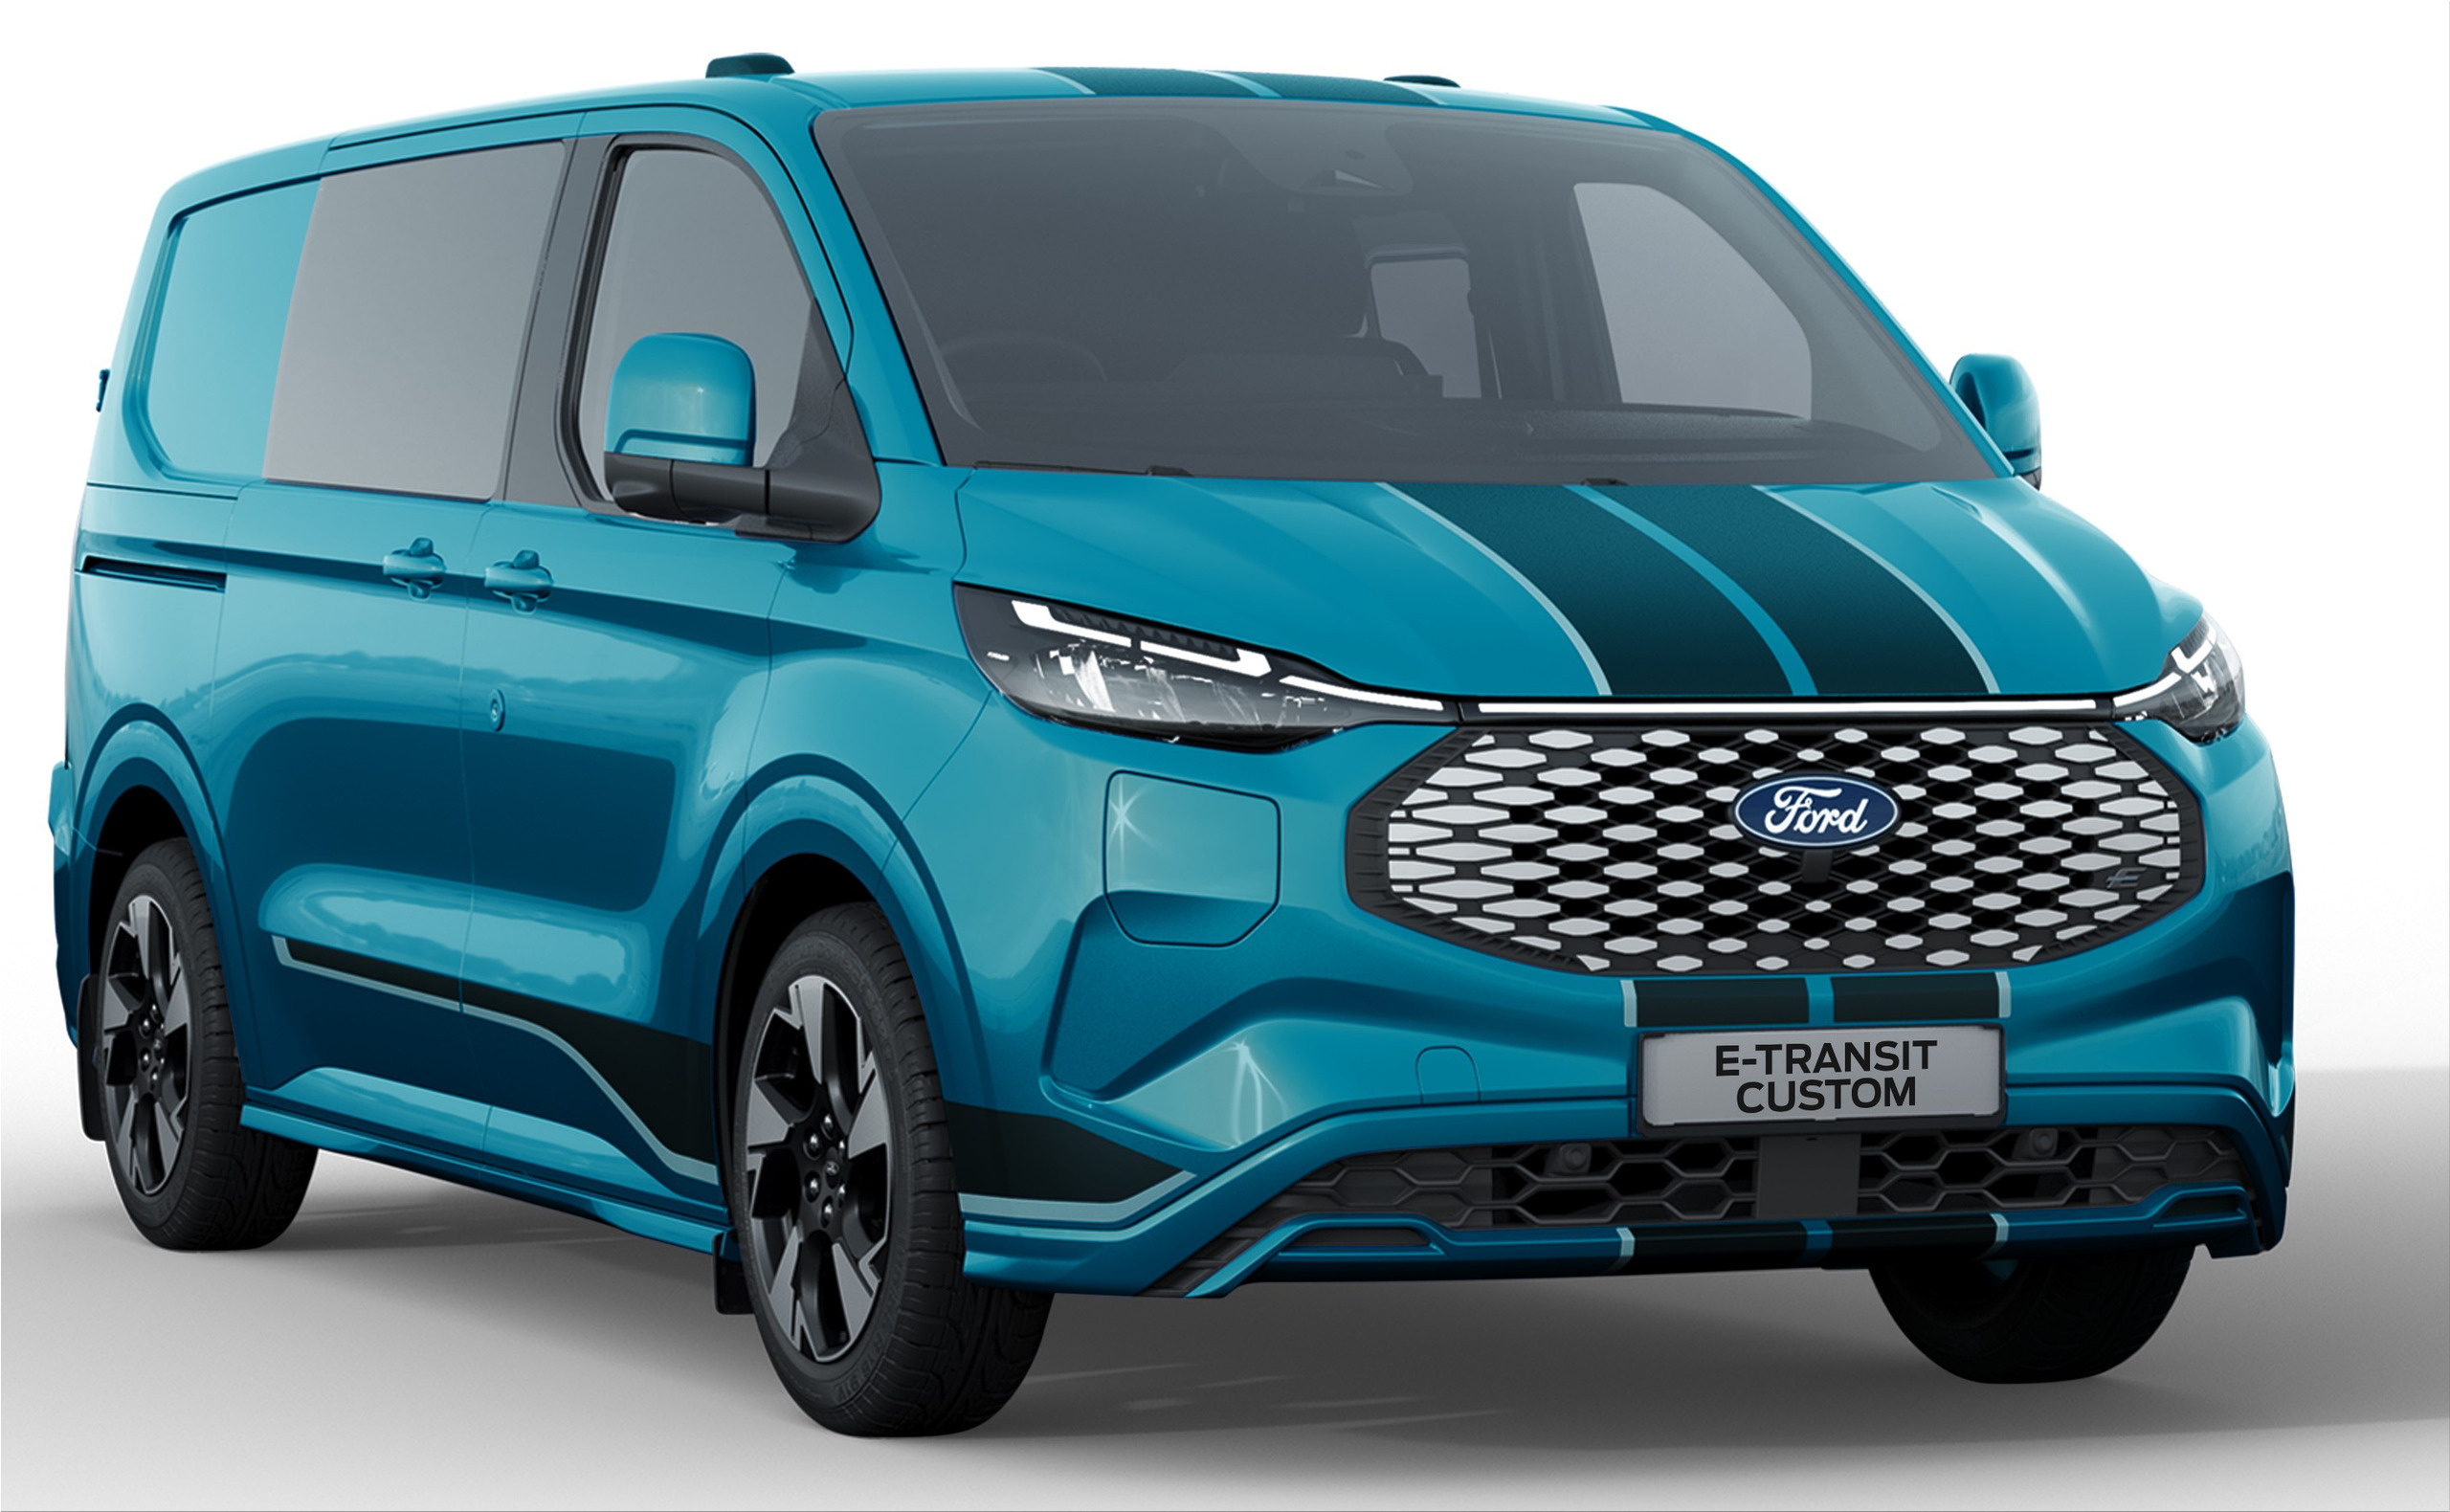 The new Ford E-Transit Custom is an all-electric van for small